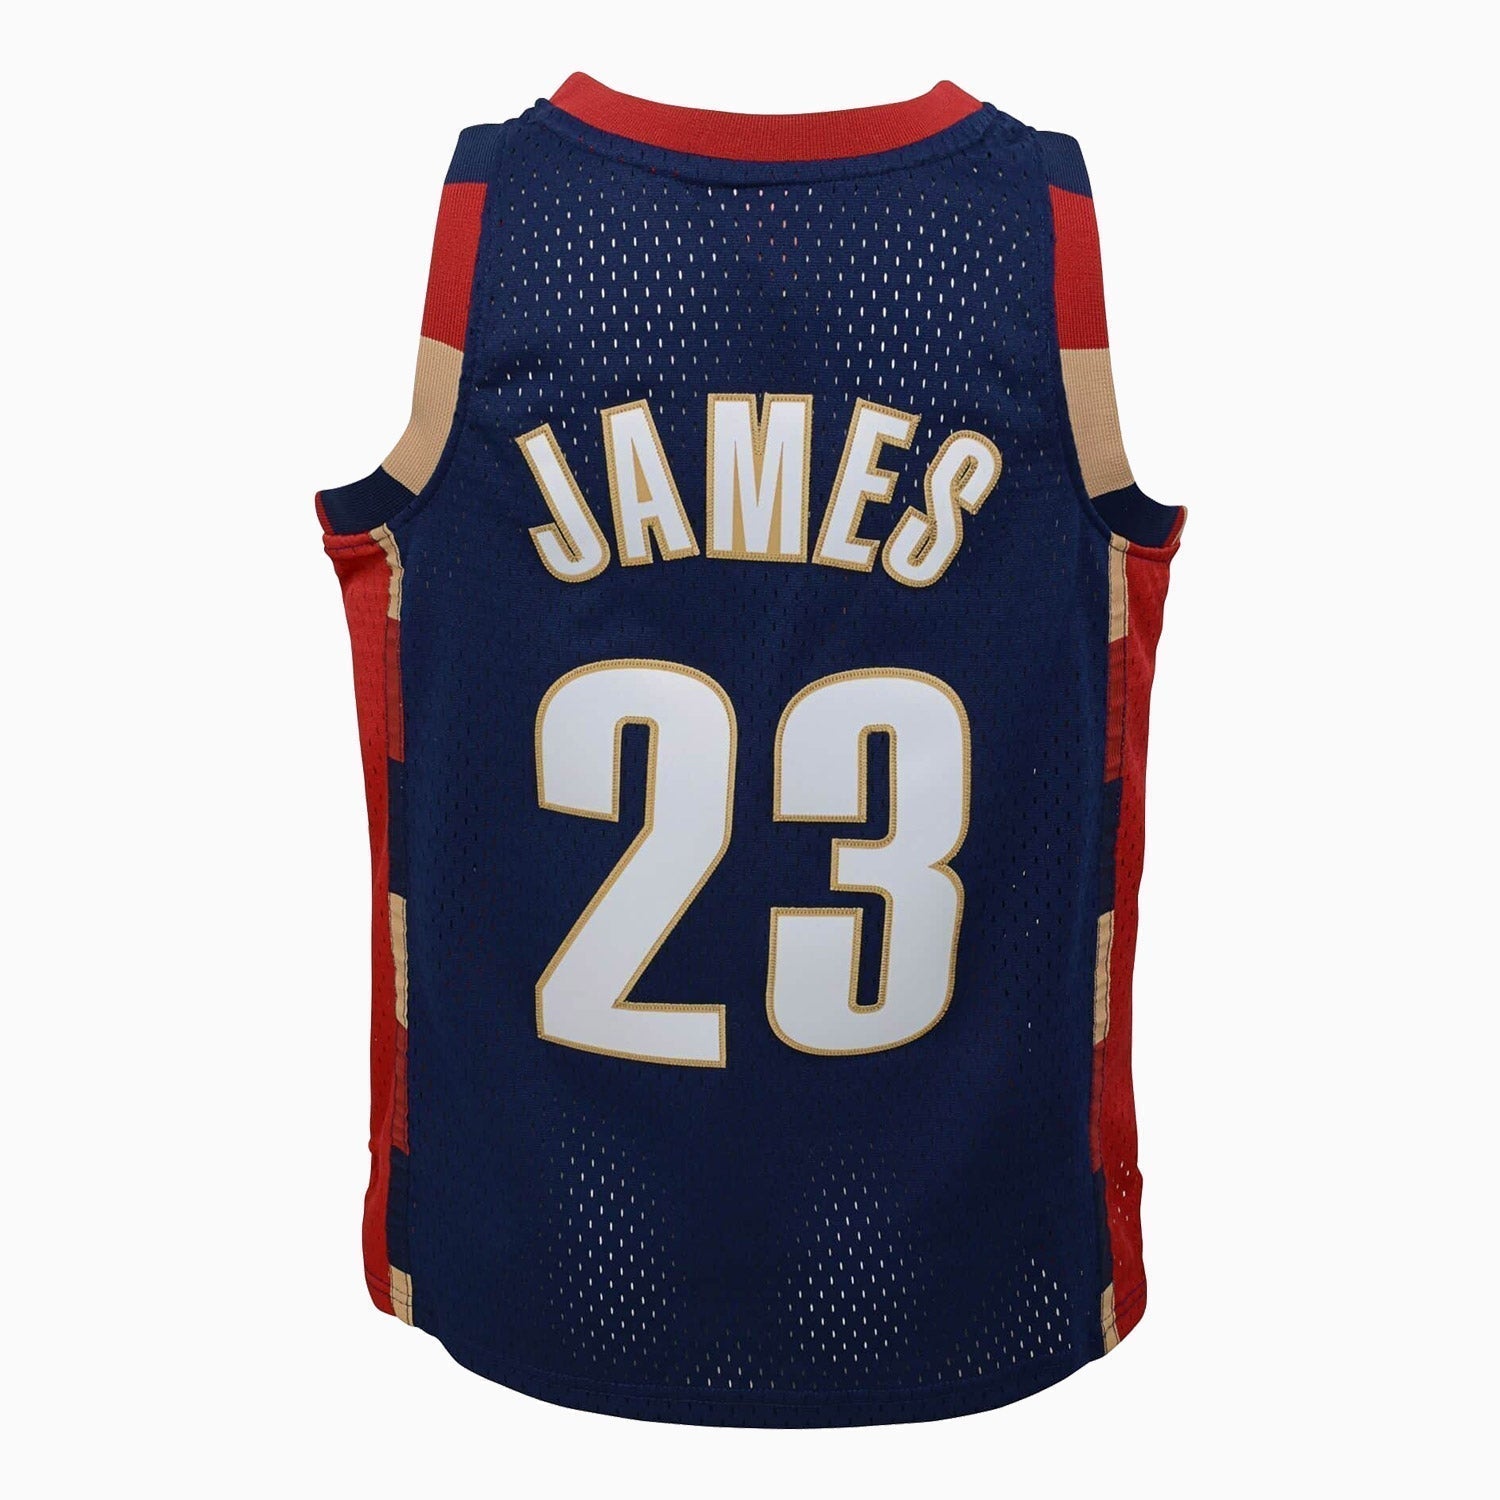 mitchell-and-ness-swingman-lebron-james-cleveland-cavaliers-nba-2008-09-jersey-9n2b7blt0-cavlj-y08